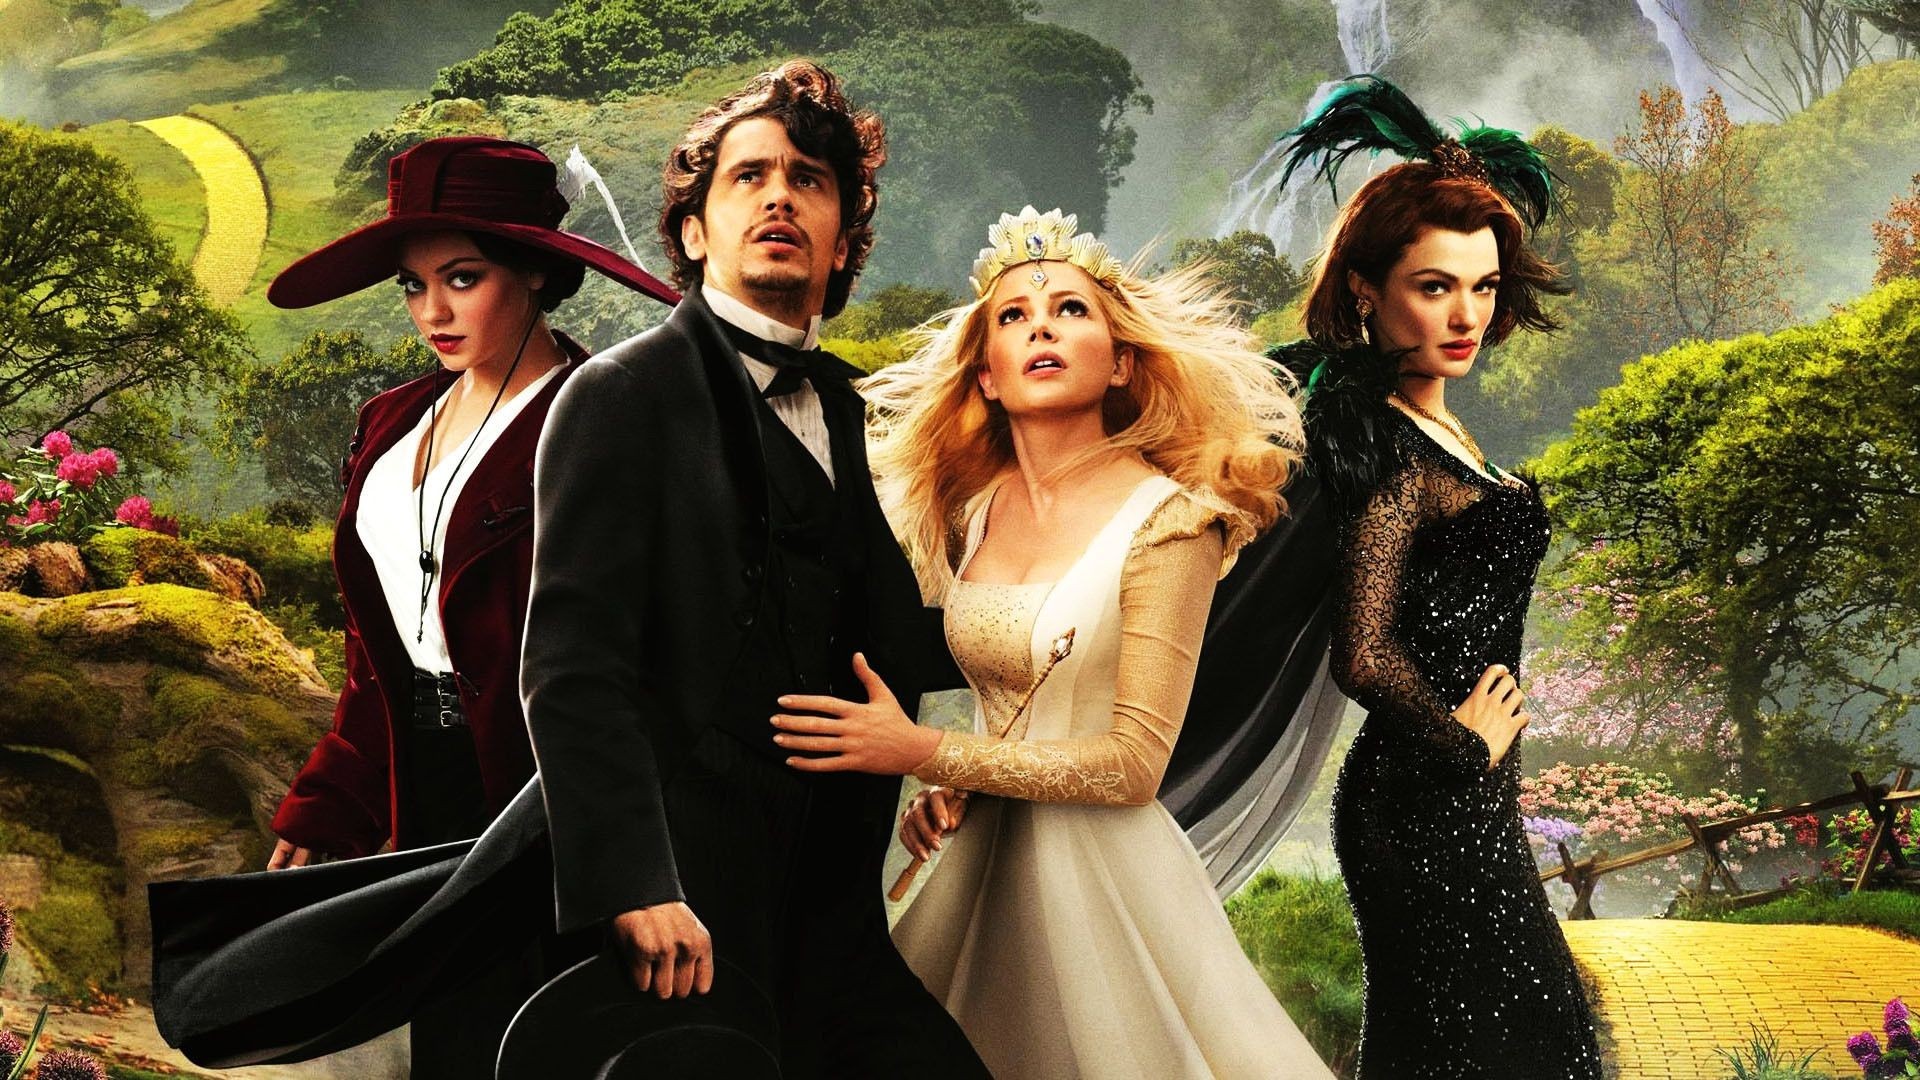 Oz The Great And Powerful Mila Kunis James Franco Michelle Williams Rachel Weisz Movies 1920x1080